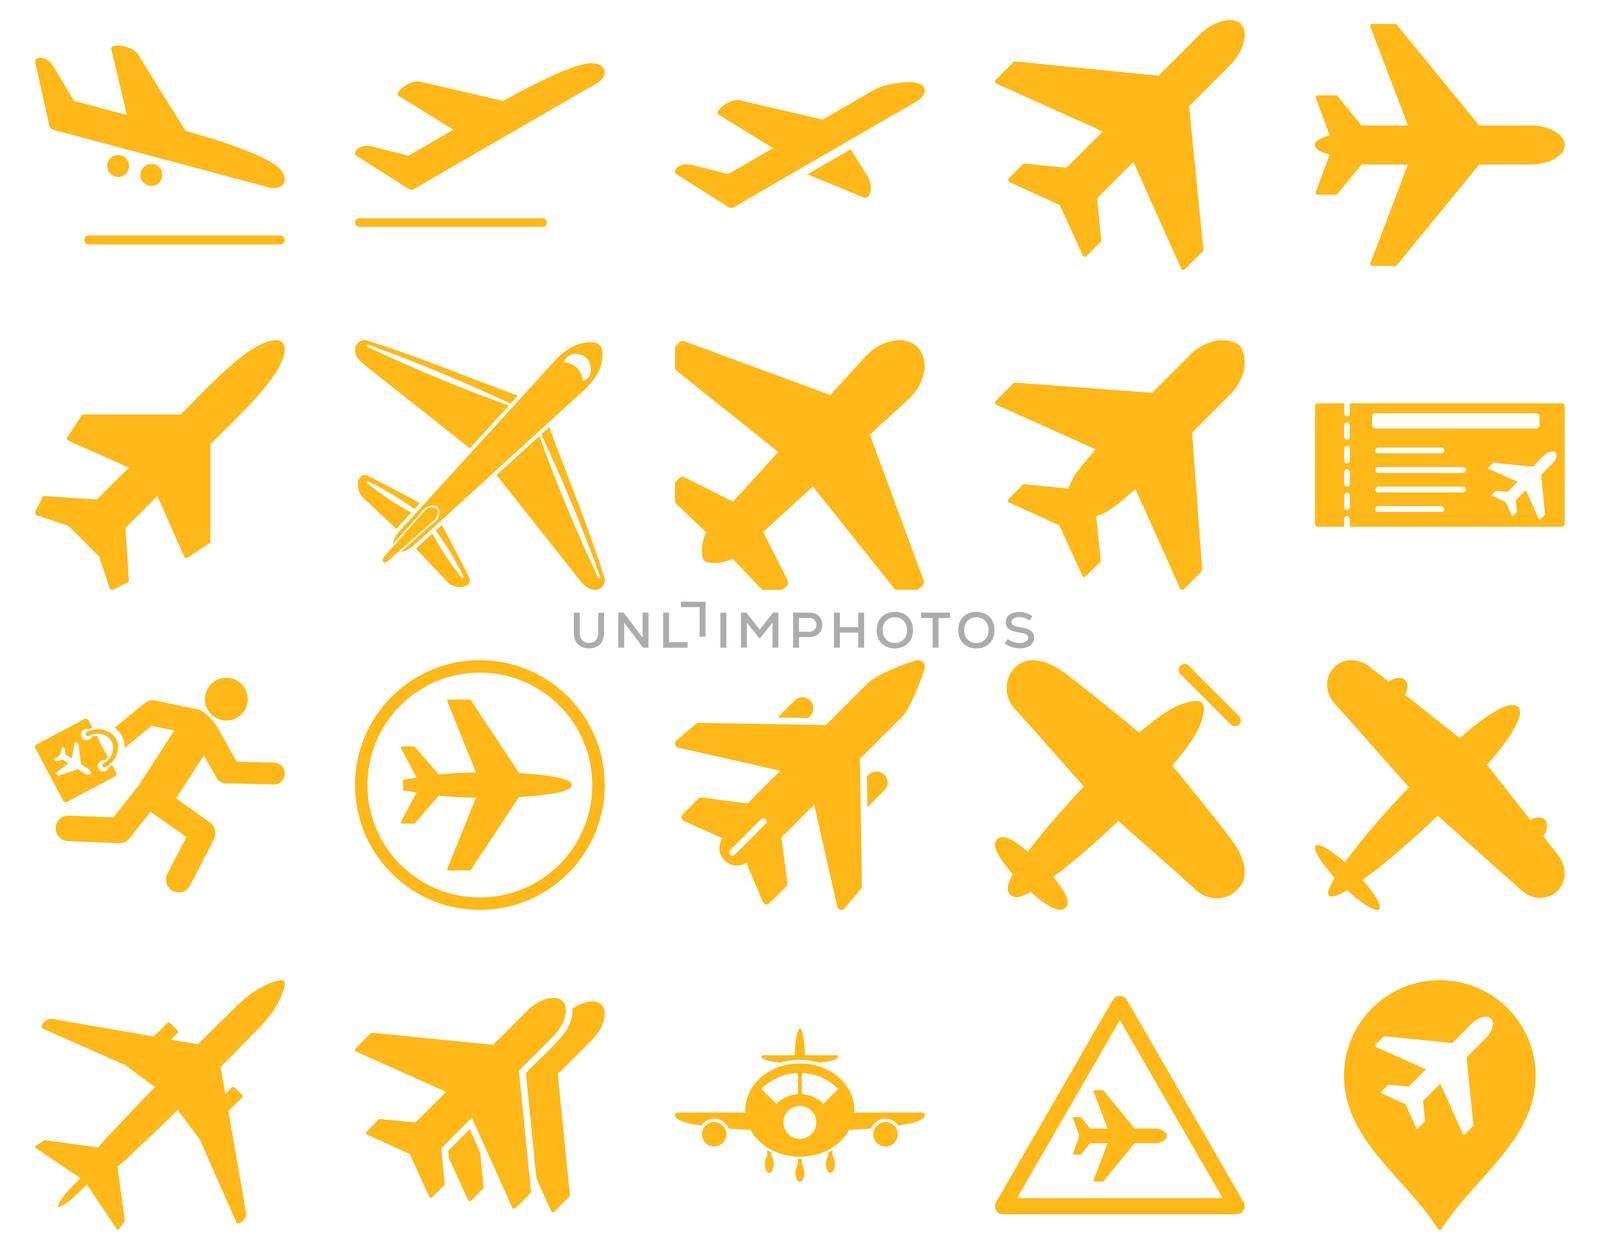 Aviation Icon Set. These flat icons use yellow color. Raster images are isolated on a white background.